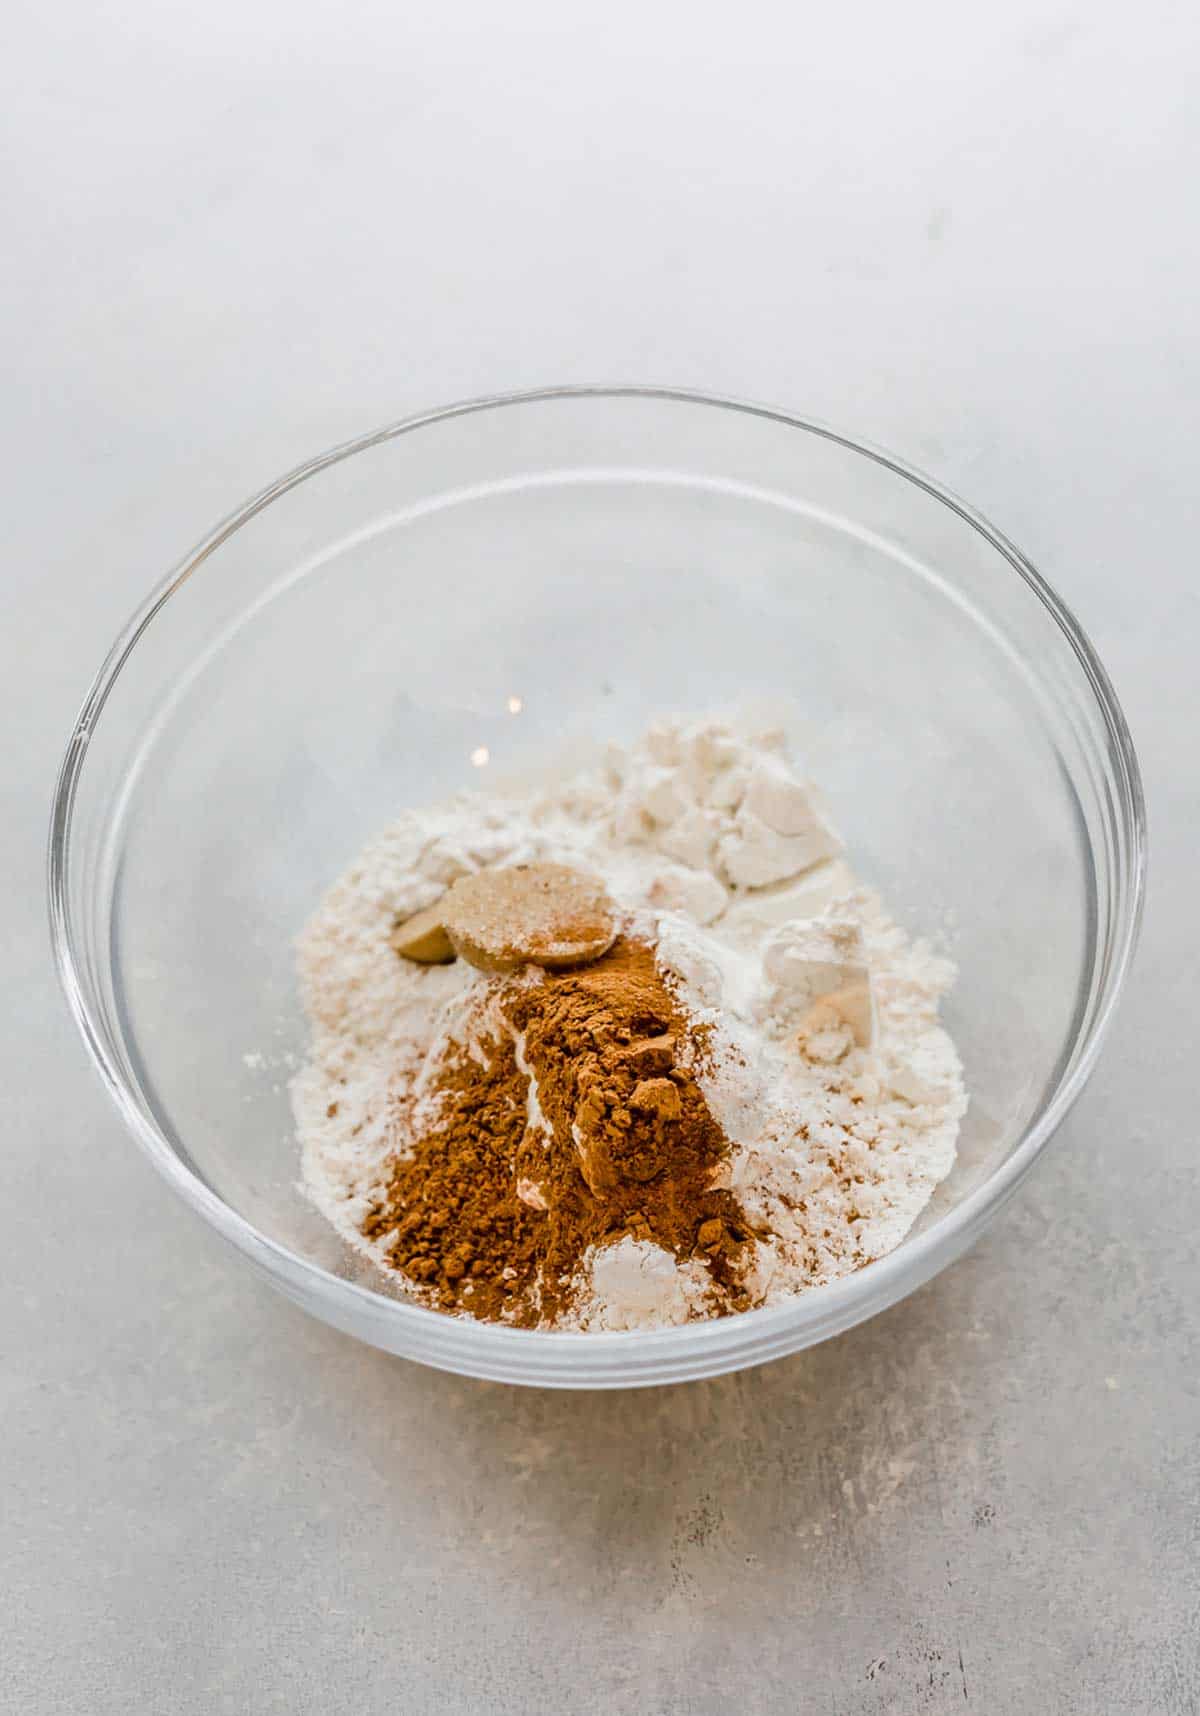 Dry ingredients used to make pumpkin pancakes, in a glass bowl on a light gray background.